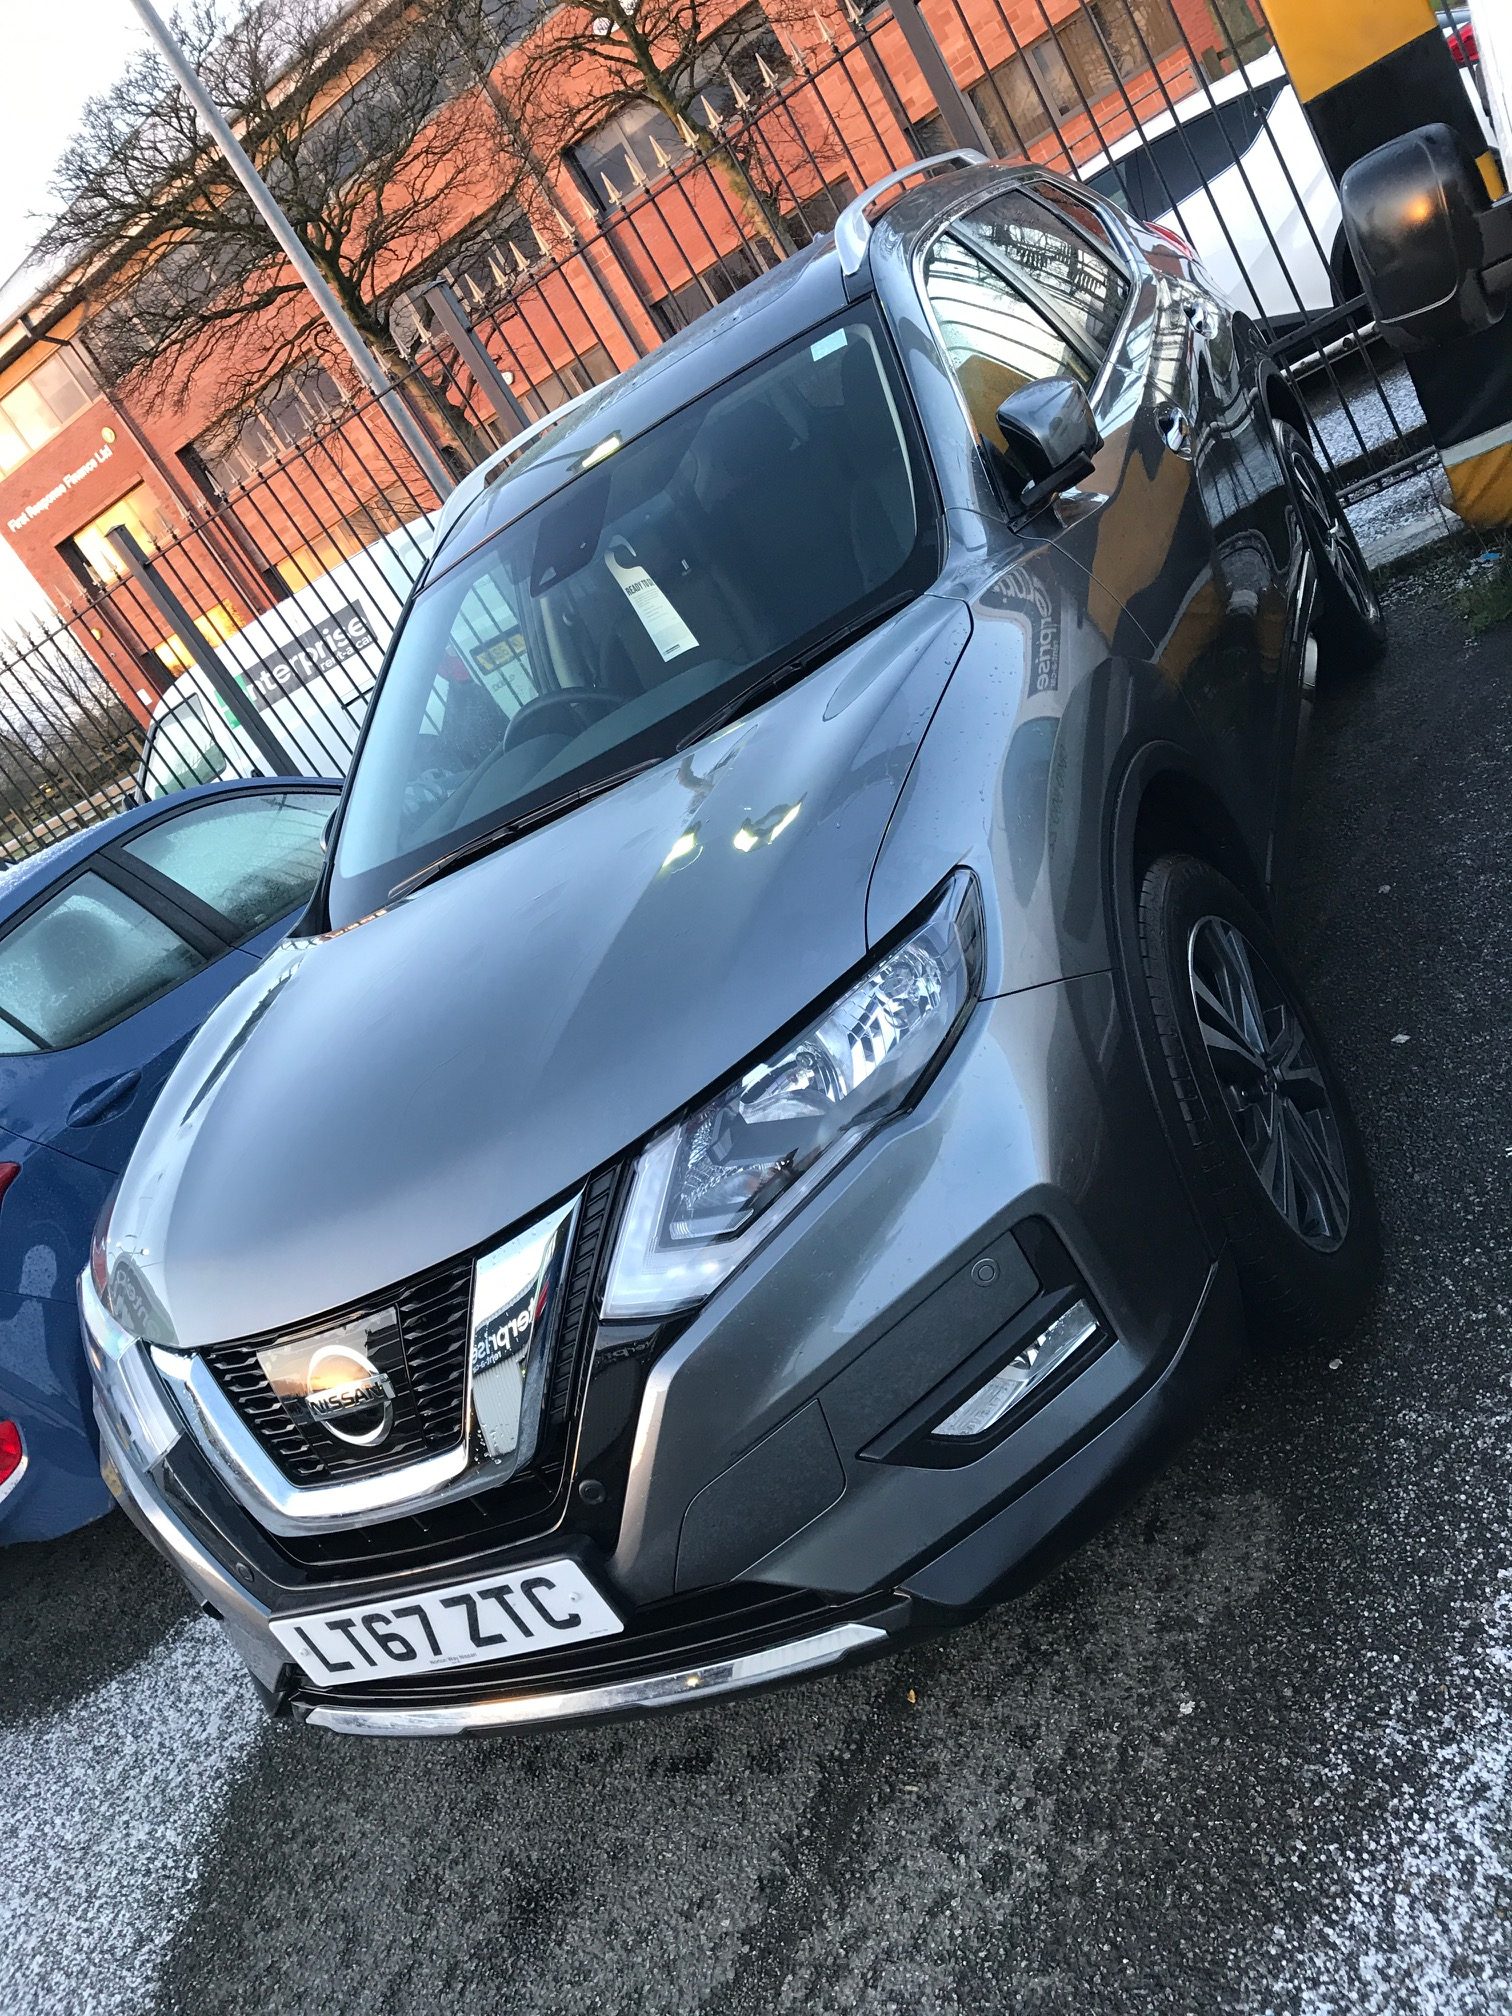 Nissan X-TRAIL DIESEL STATION WAGON 1.6 dCi N-Connecta 5dr Car Leasing Best Offers